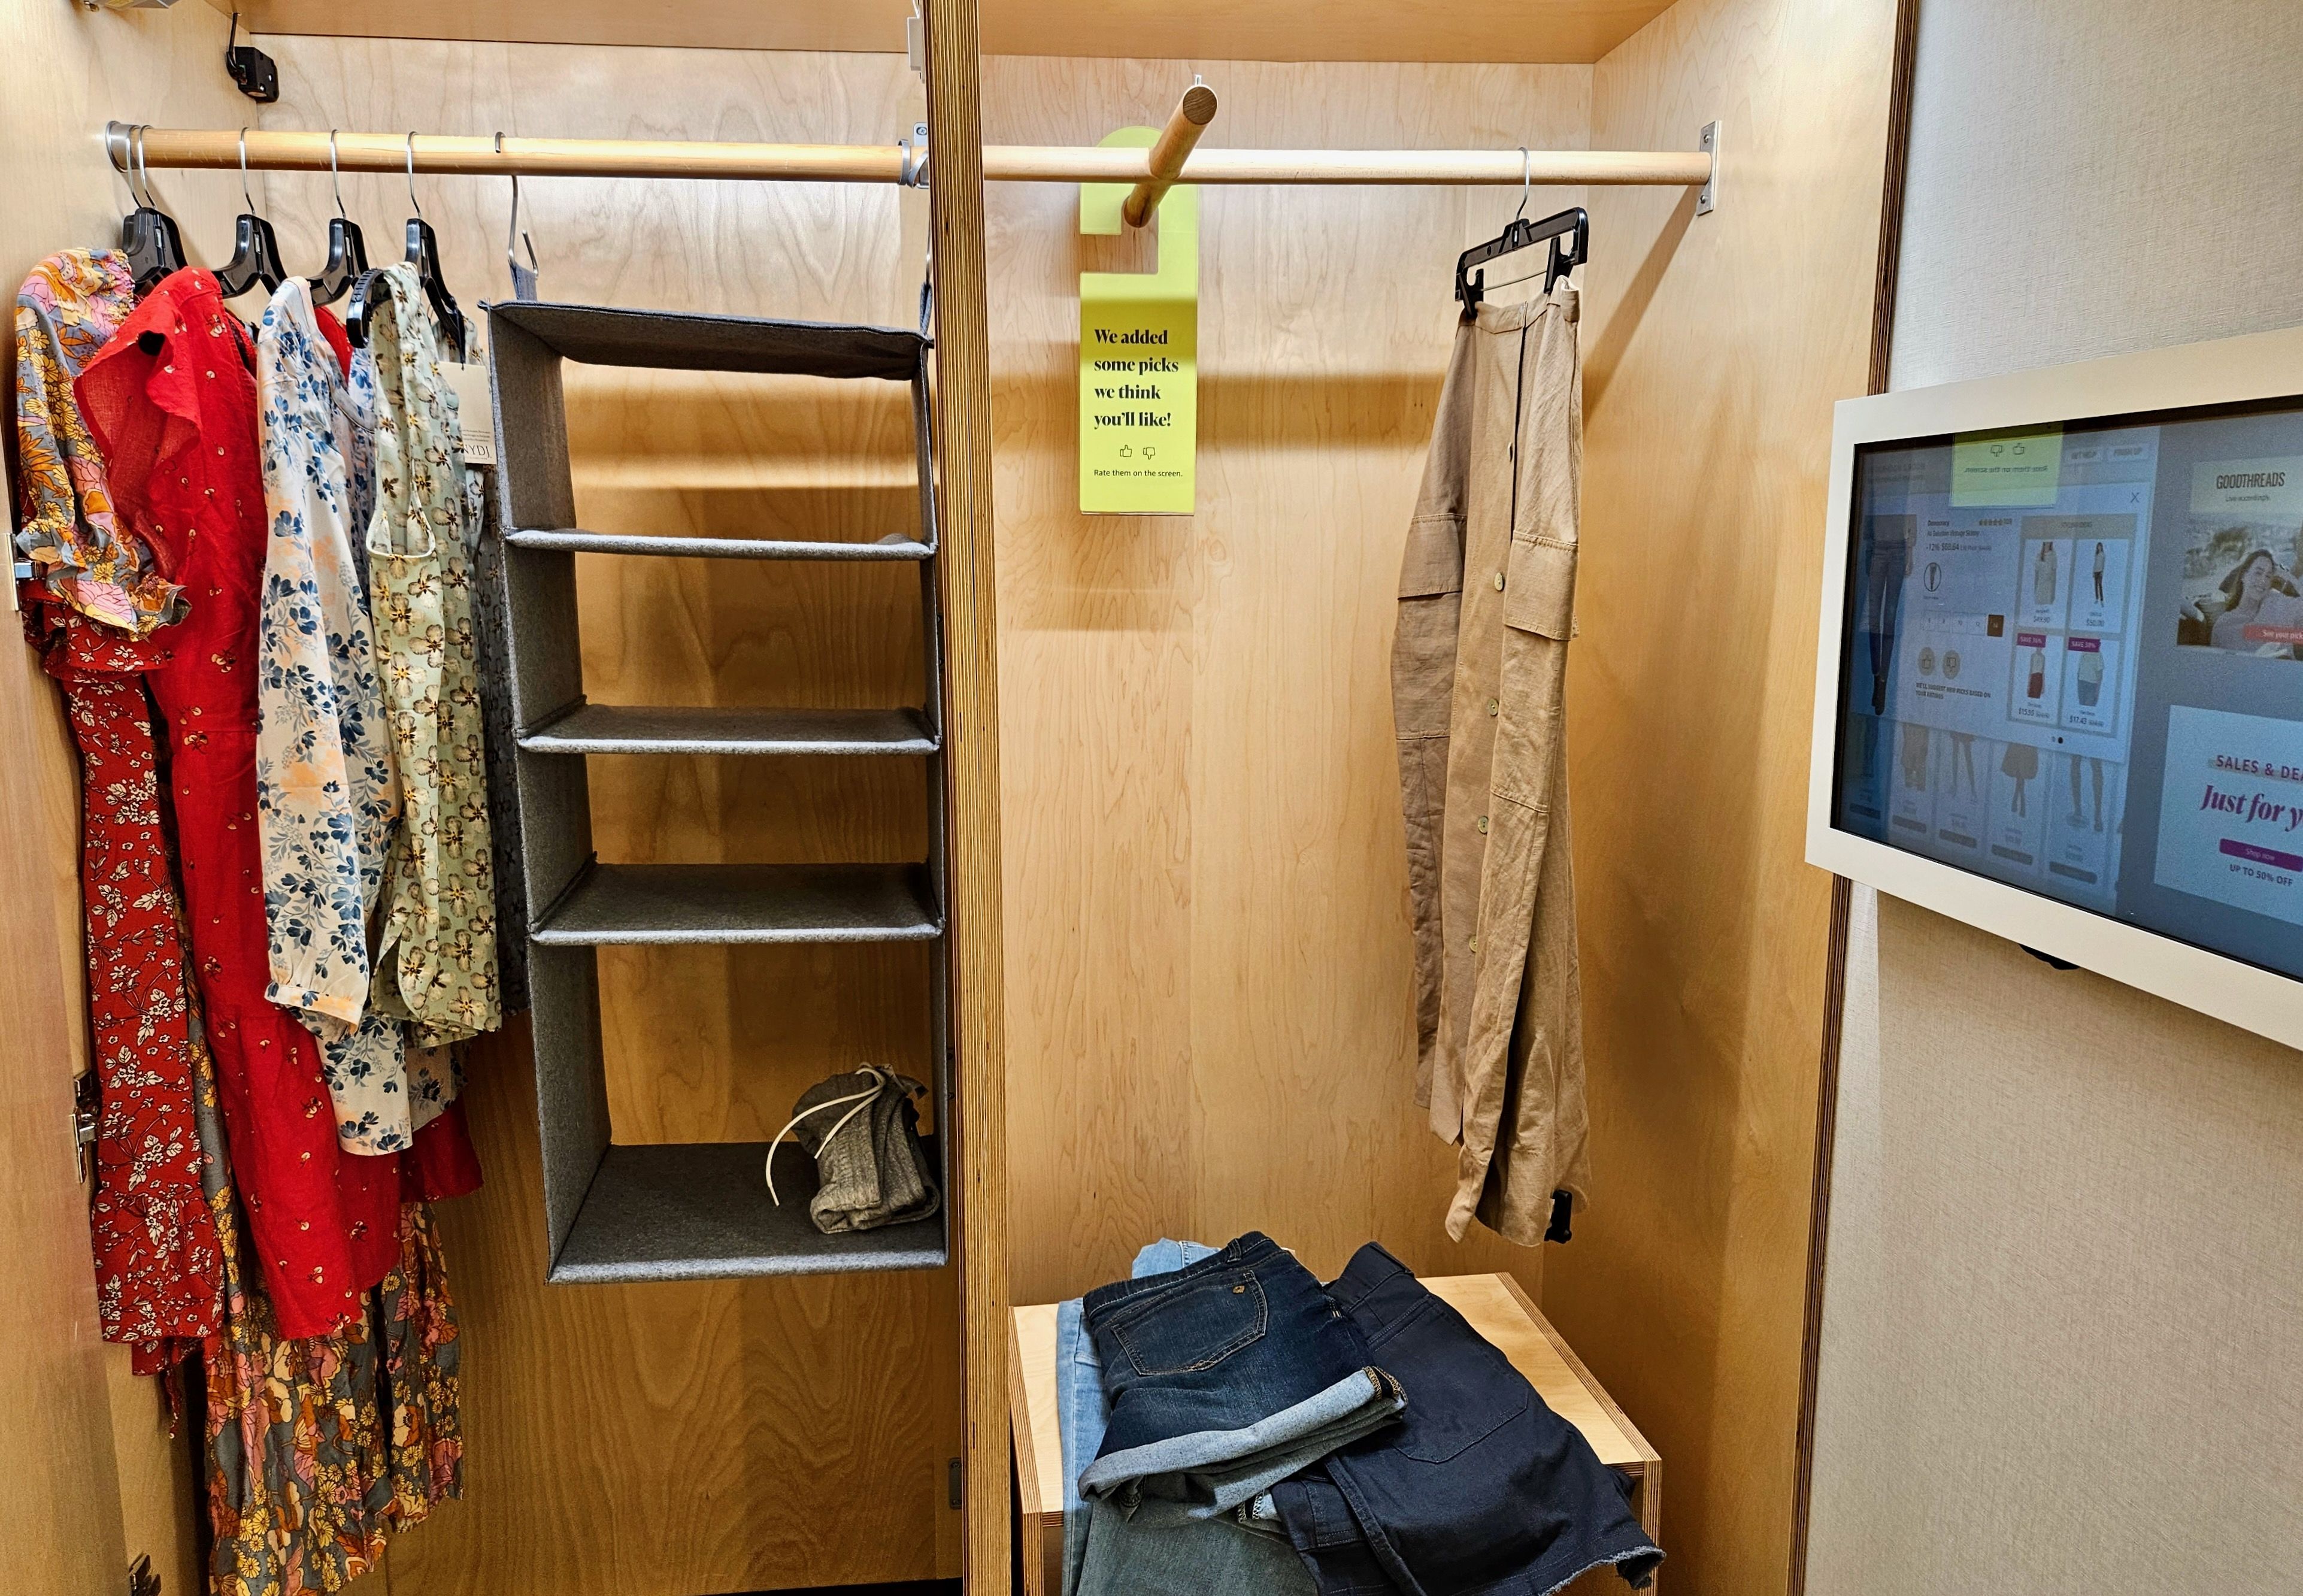 A closet with dresses and jeans inside, next to a touch screen on the right wall